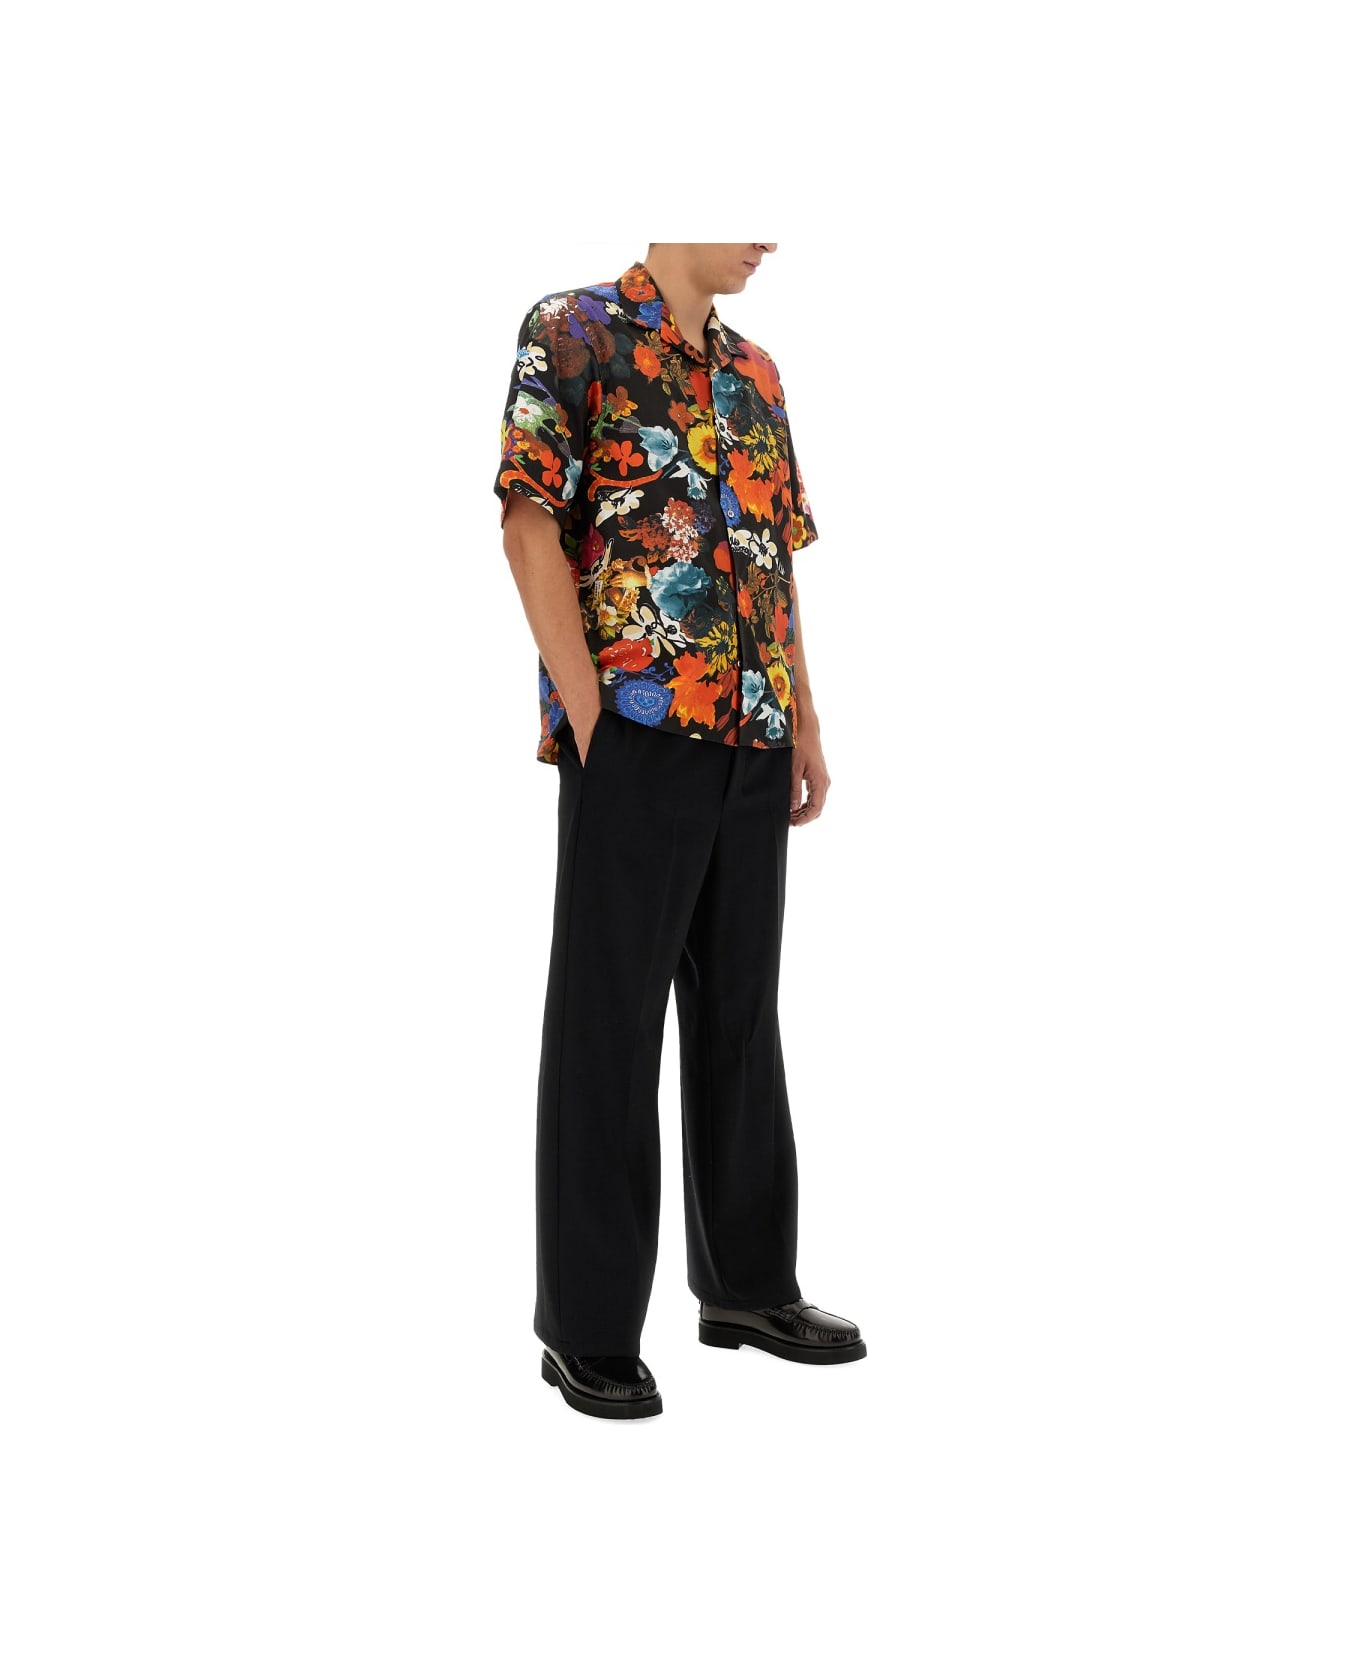 Moschino Shirt With Floral Pattern - MULTICOLOUR